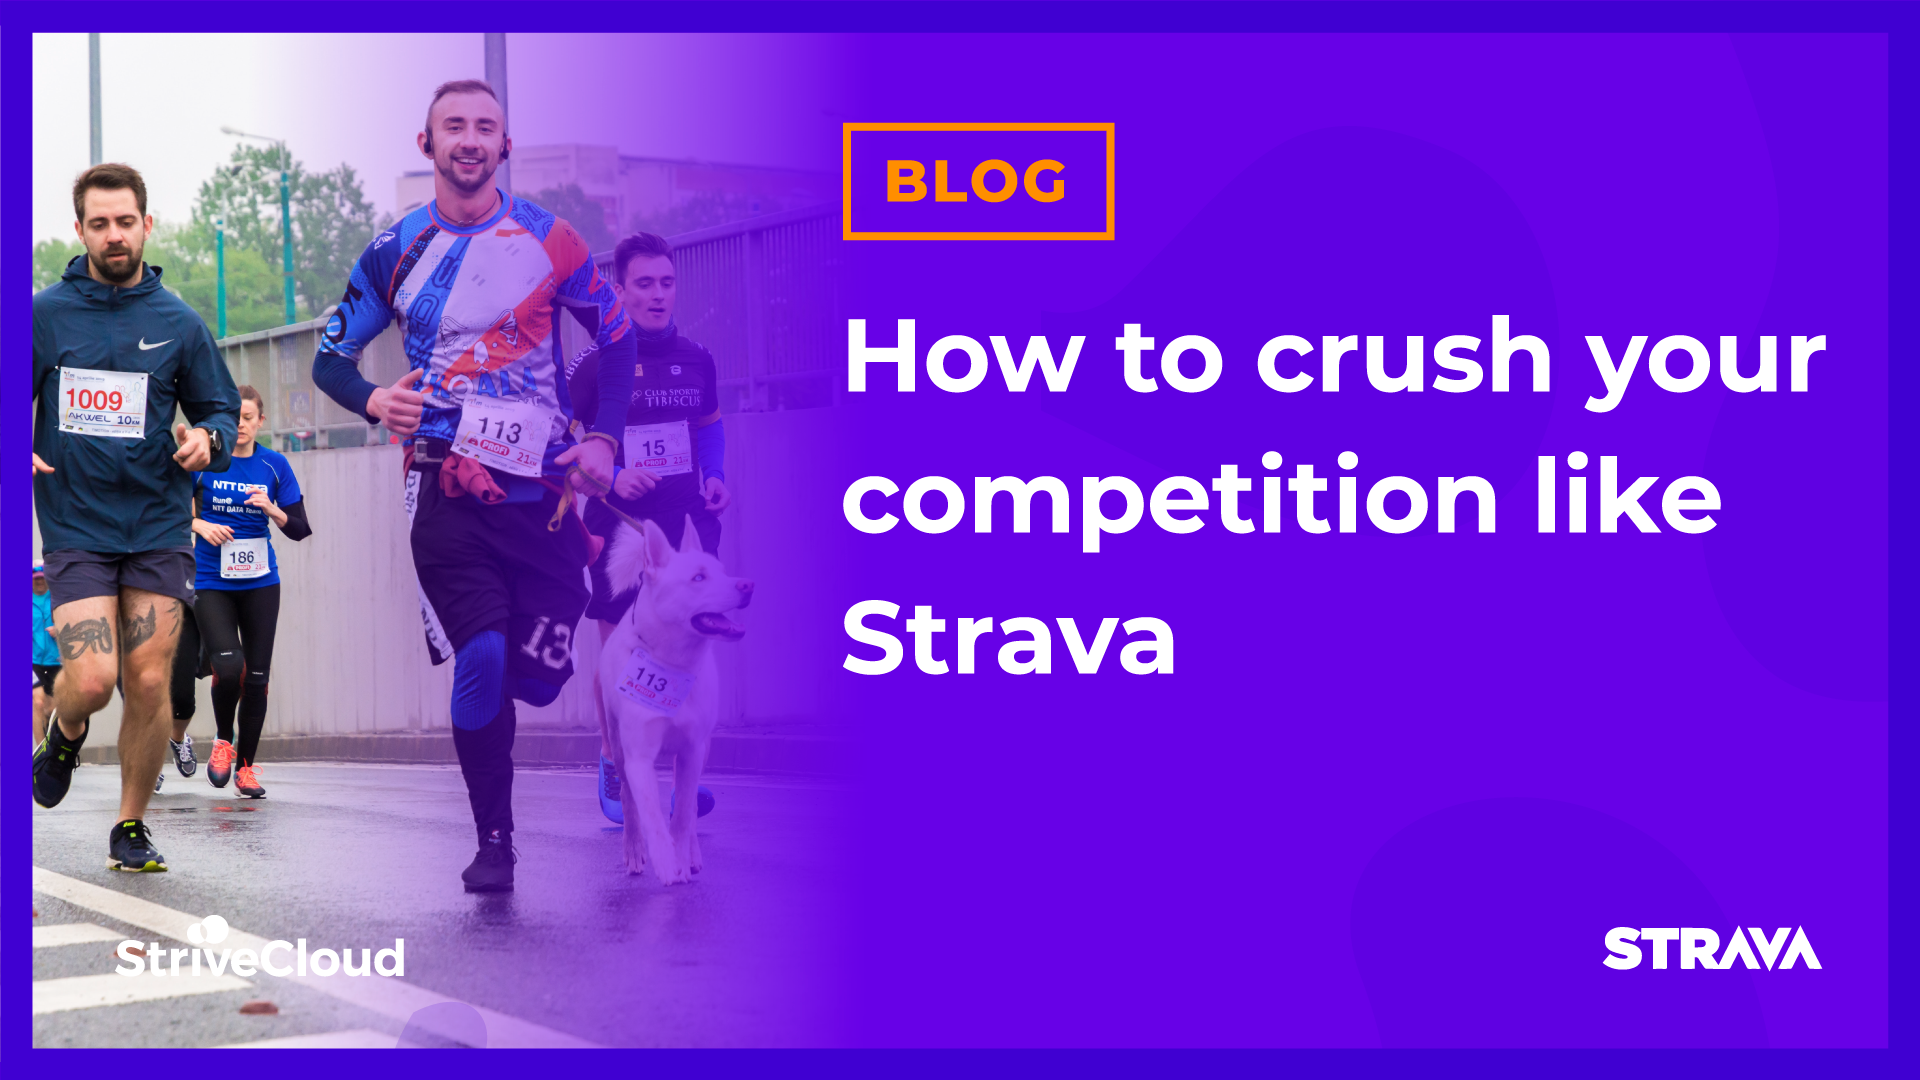 How to crush your competition like Strava